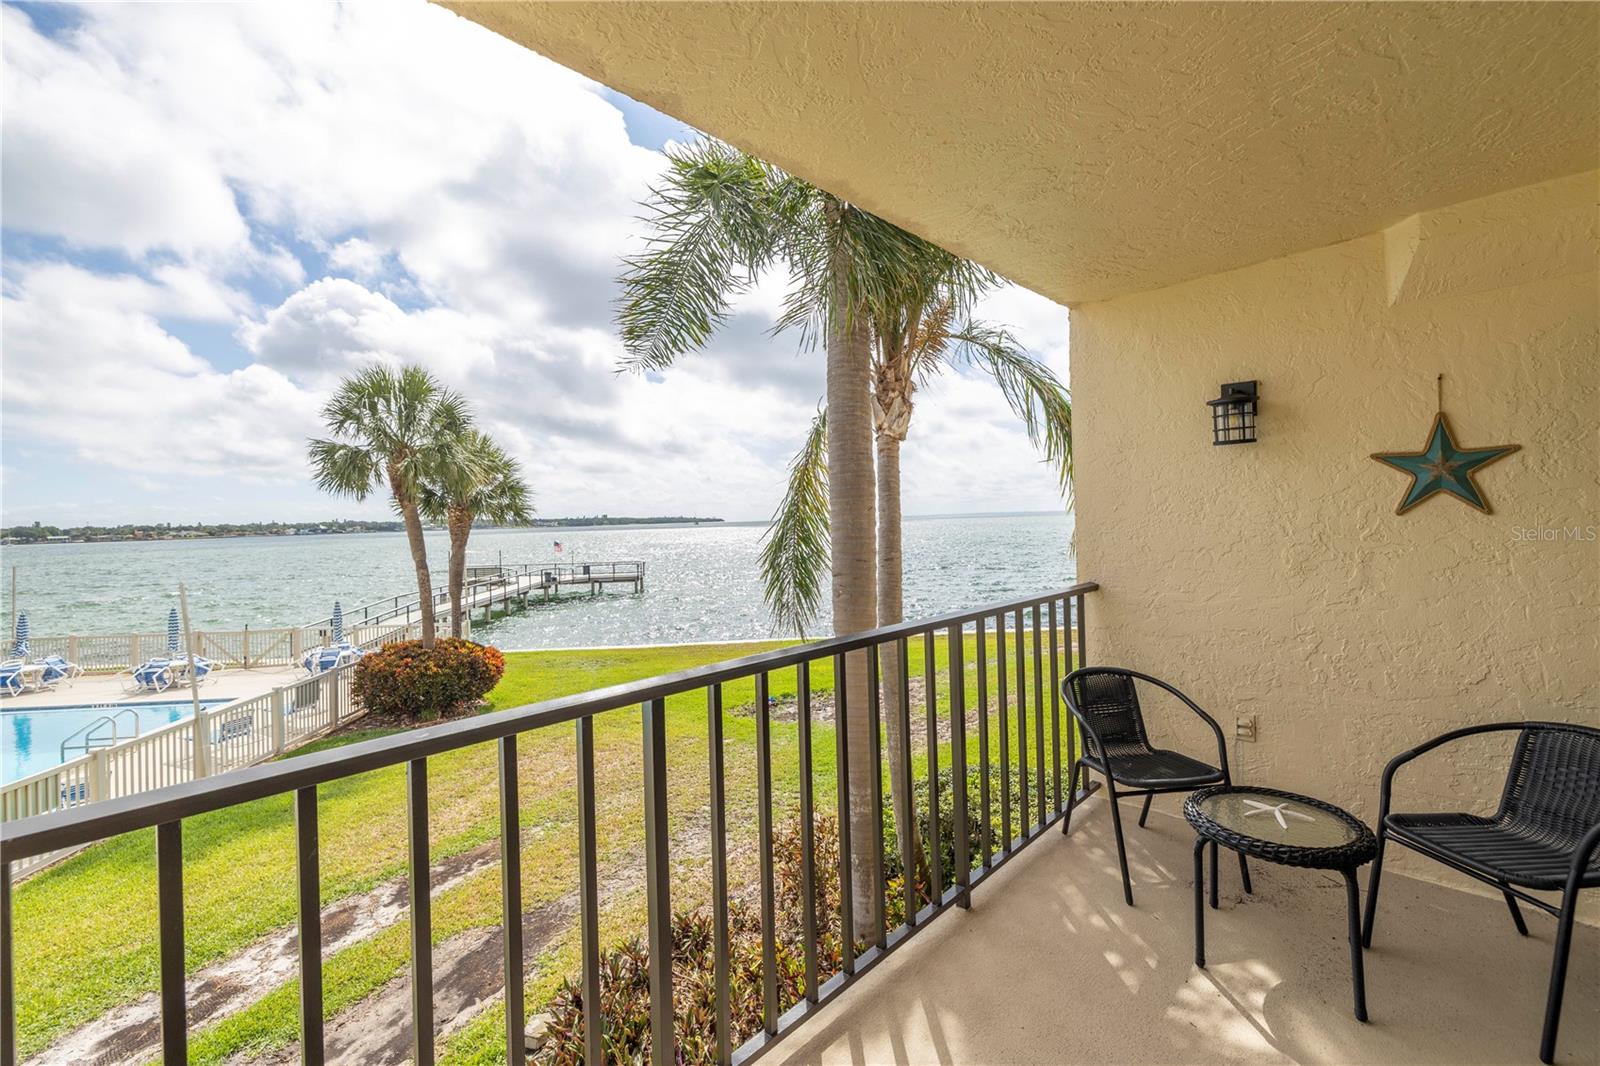 Photo 26 of 48 of 7520 SUNSHINE SKYWAY LANE S T18 furnished condo